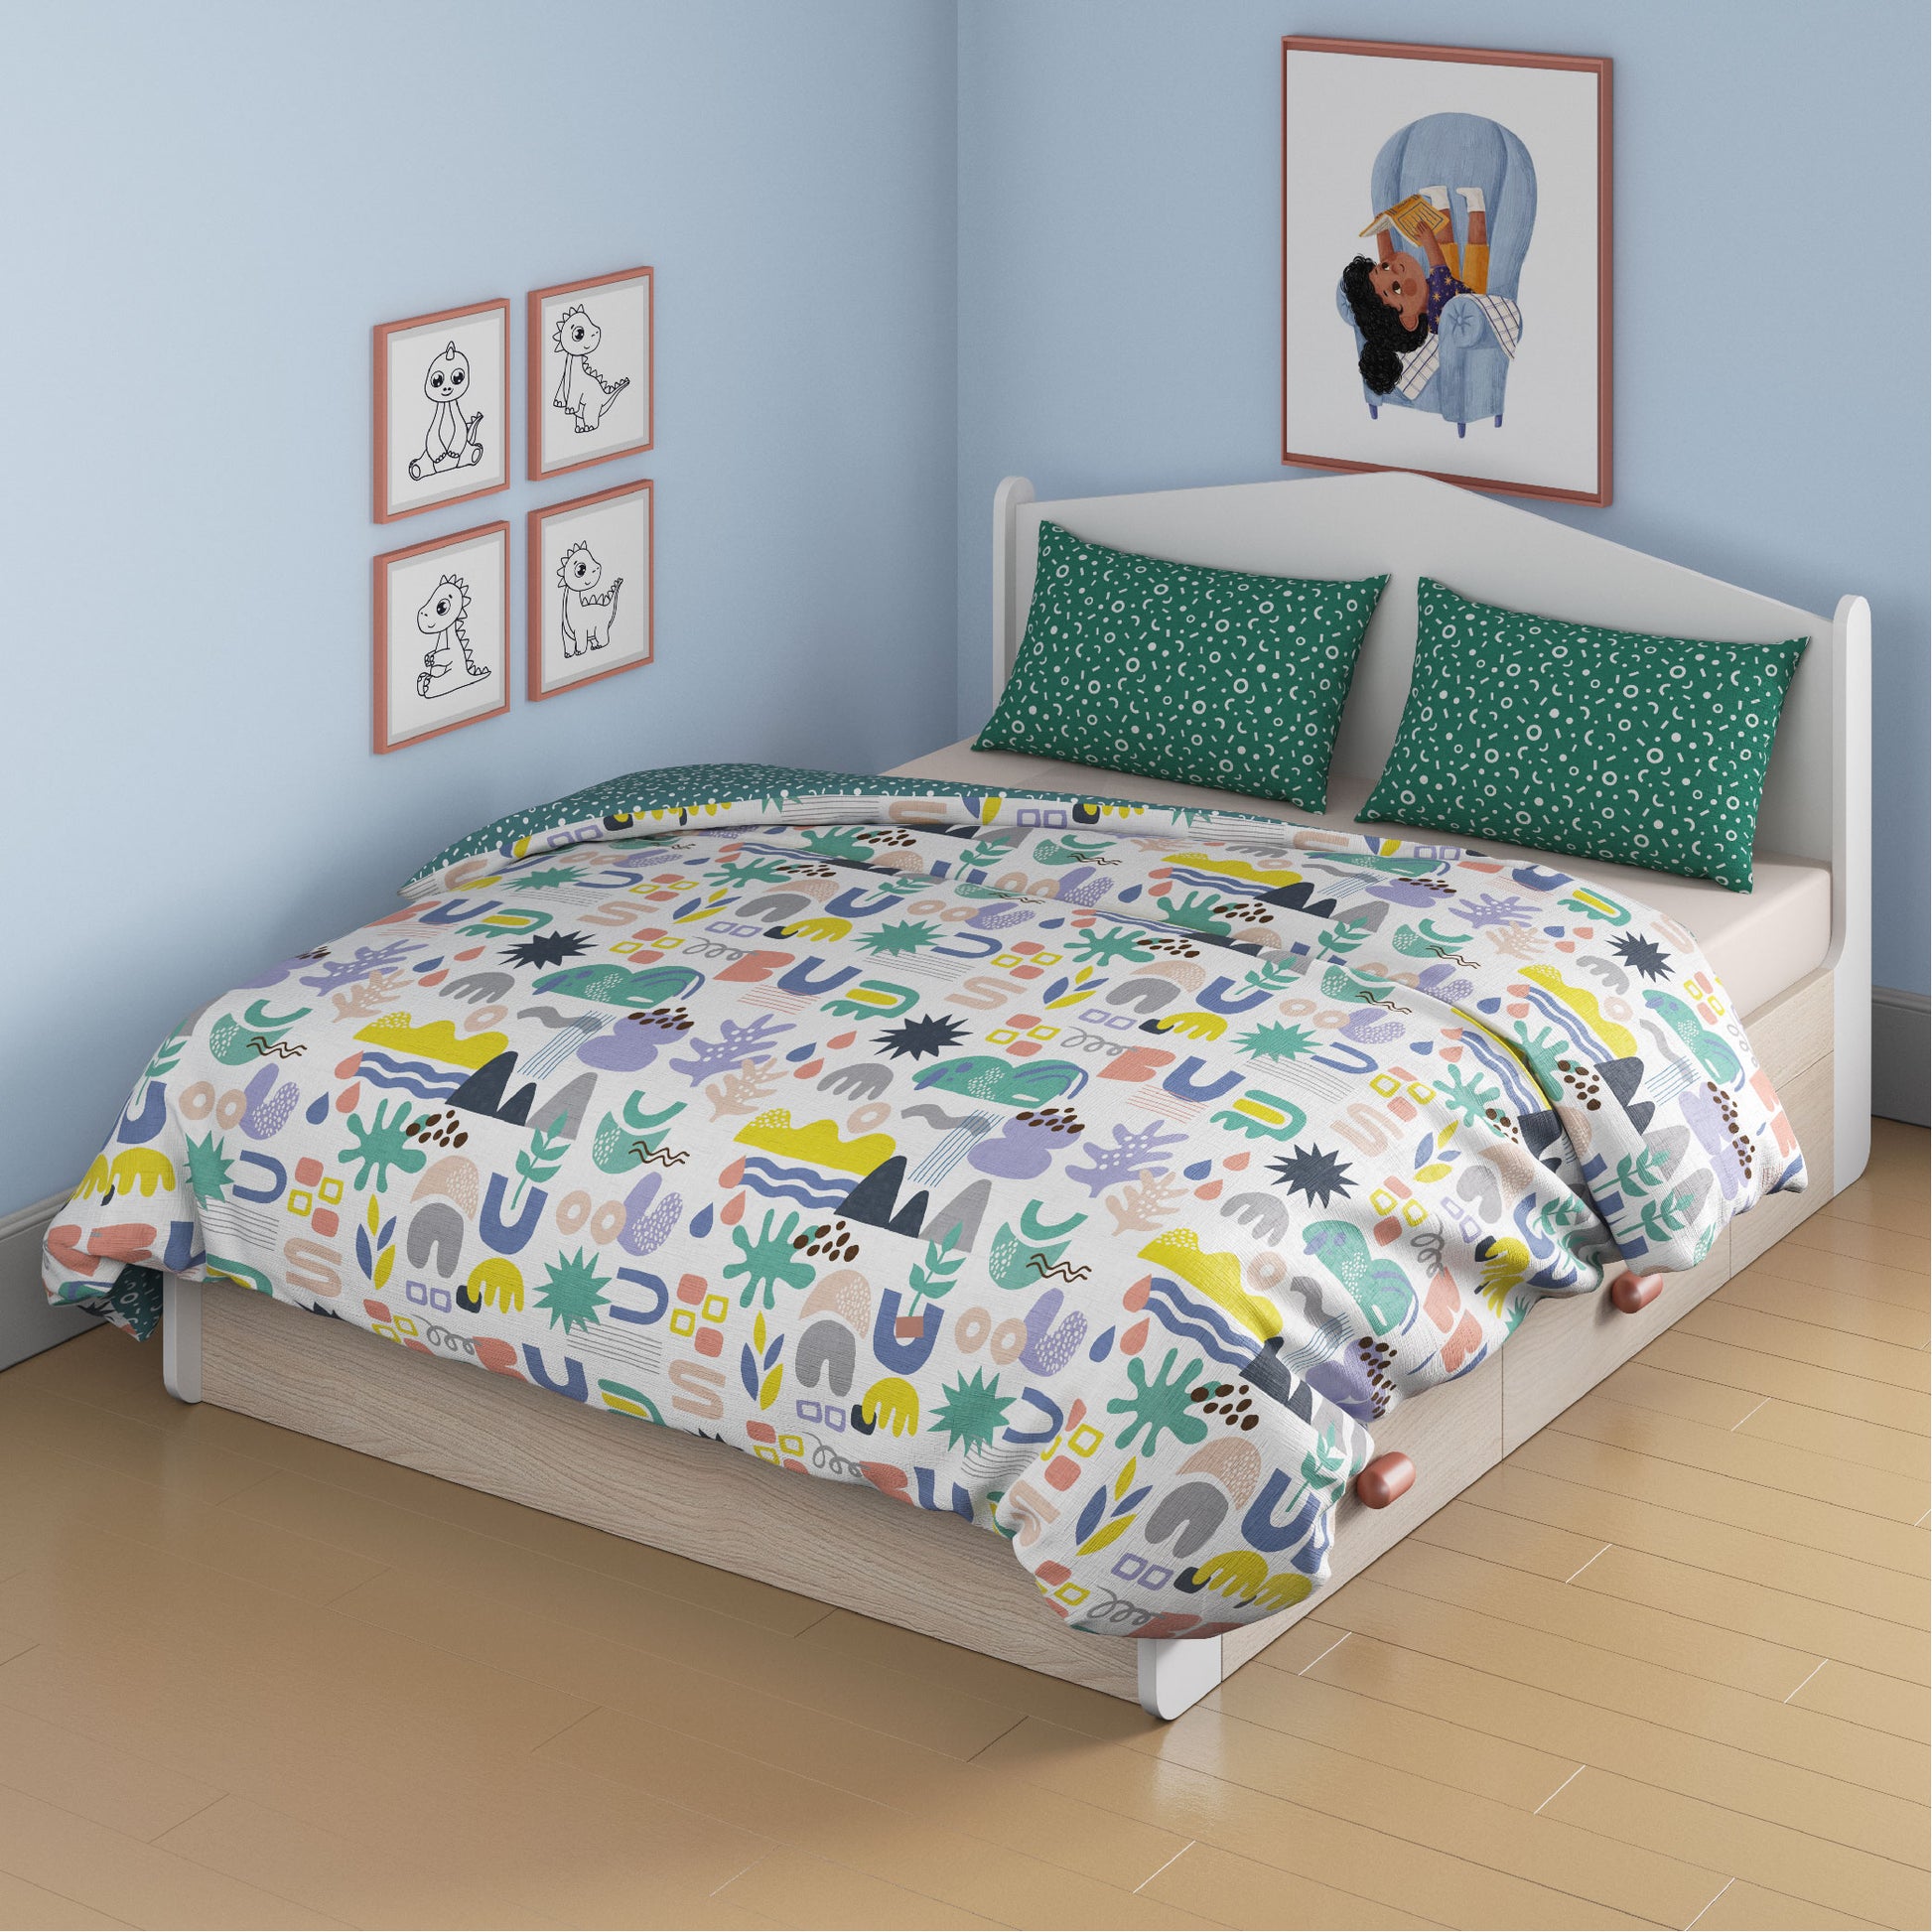 media_gallary Oodles of Doodles Reversible AC Comforter Queen Bed Size 1